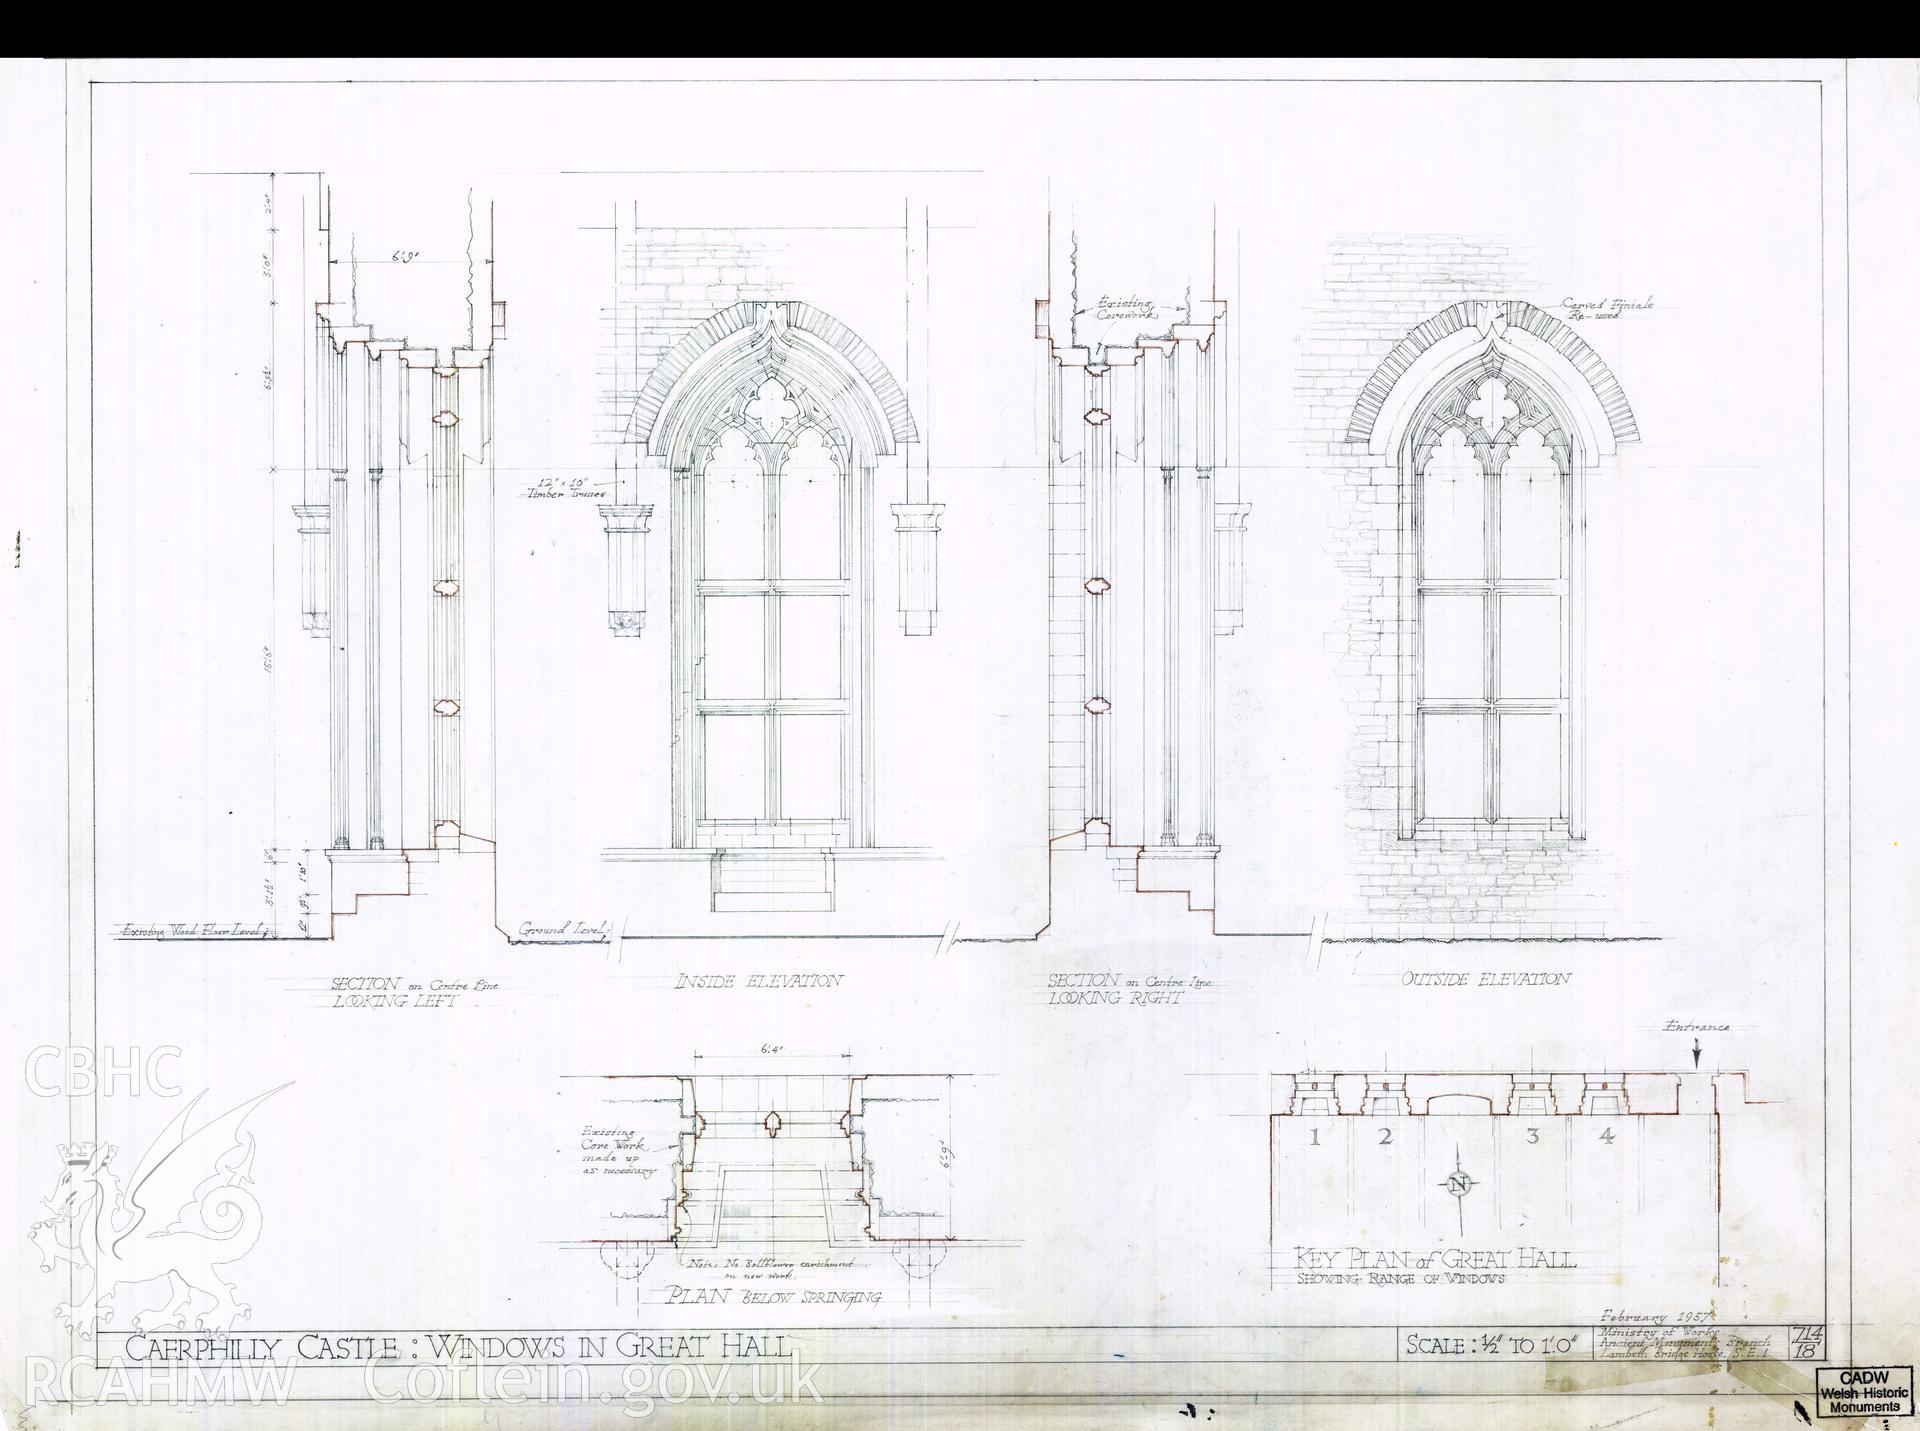 Cadw guardianship monument drawing of Caerphilly Castle. Hall, windows, inside + out. Cadw ref. no: 714/18. Scale 1:24.